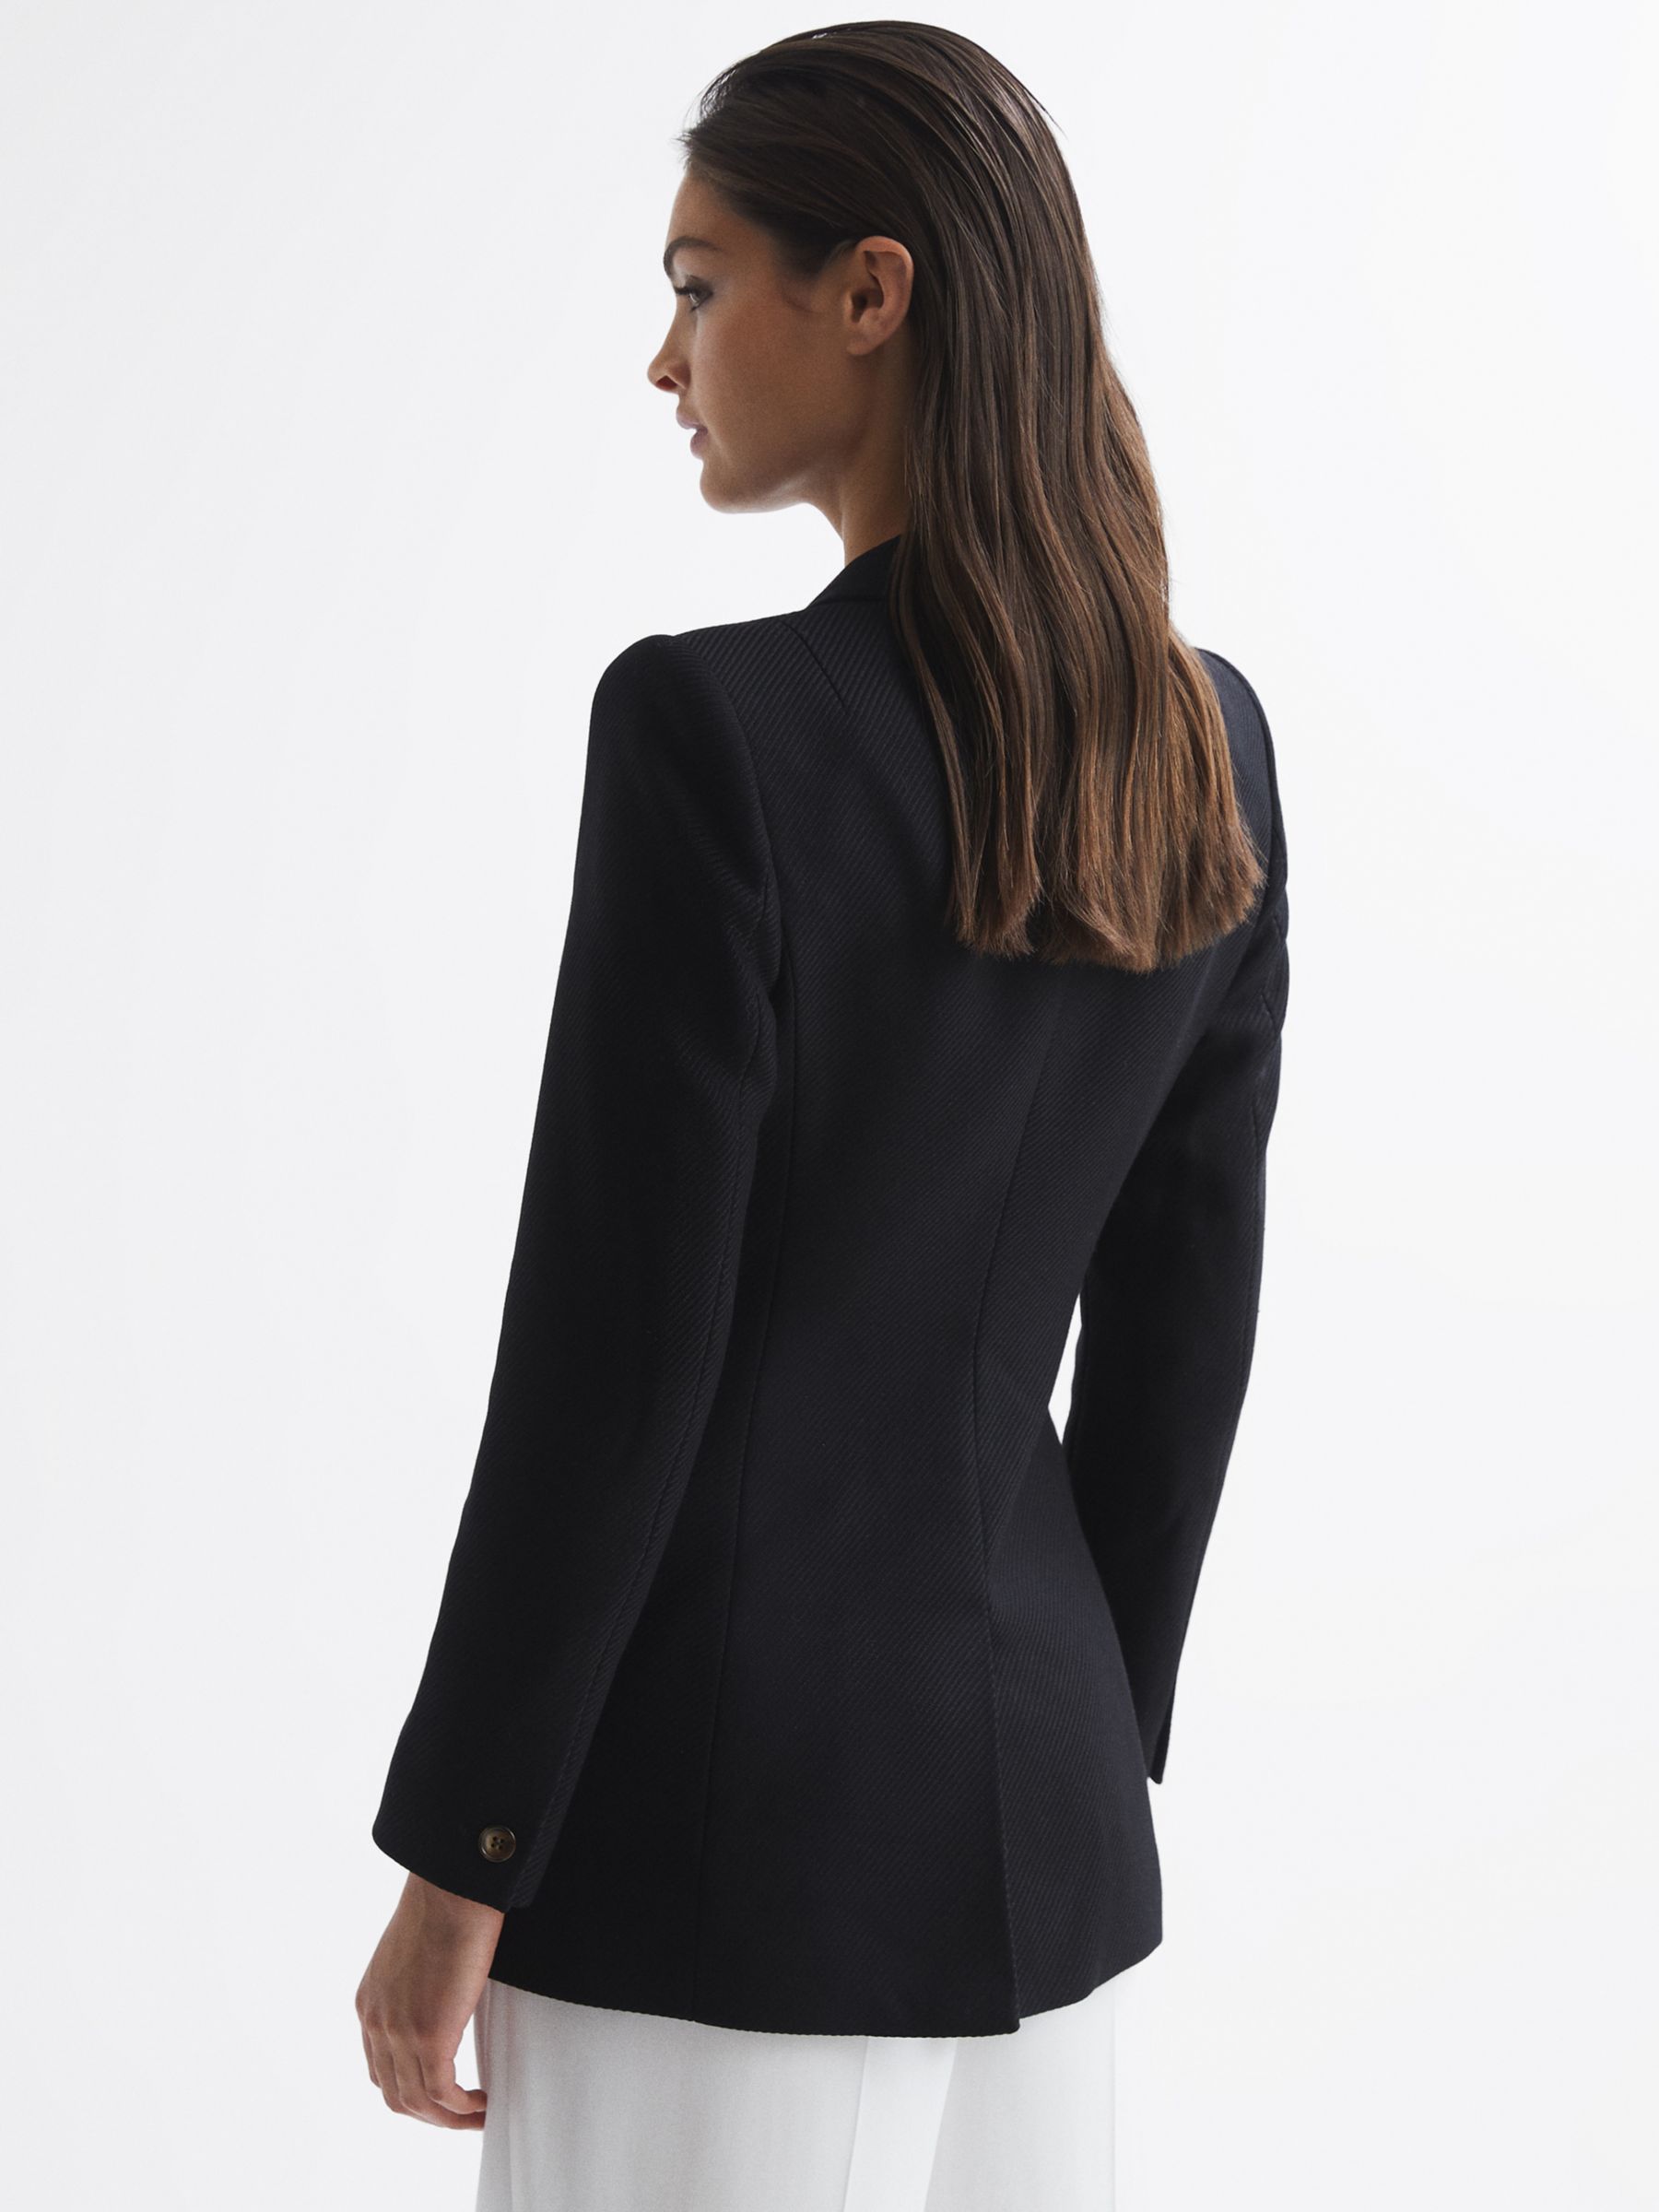 Reiss Laura Double Breasted Wool Blend Blazer, Black at John Lewis ...